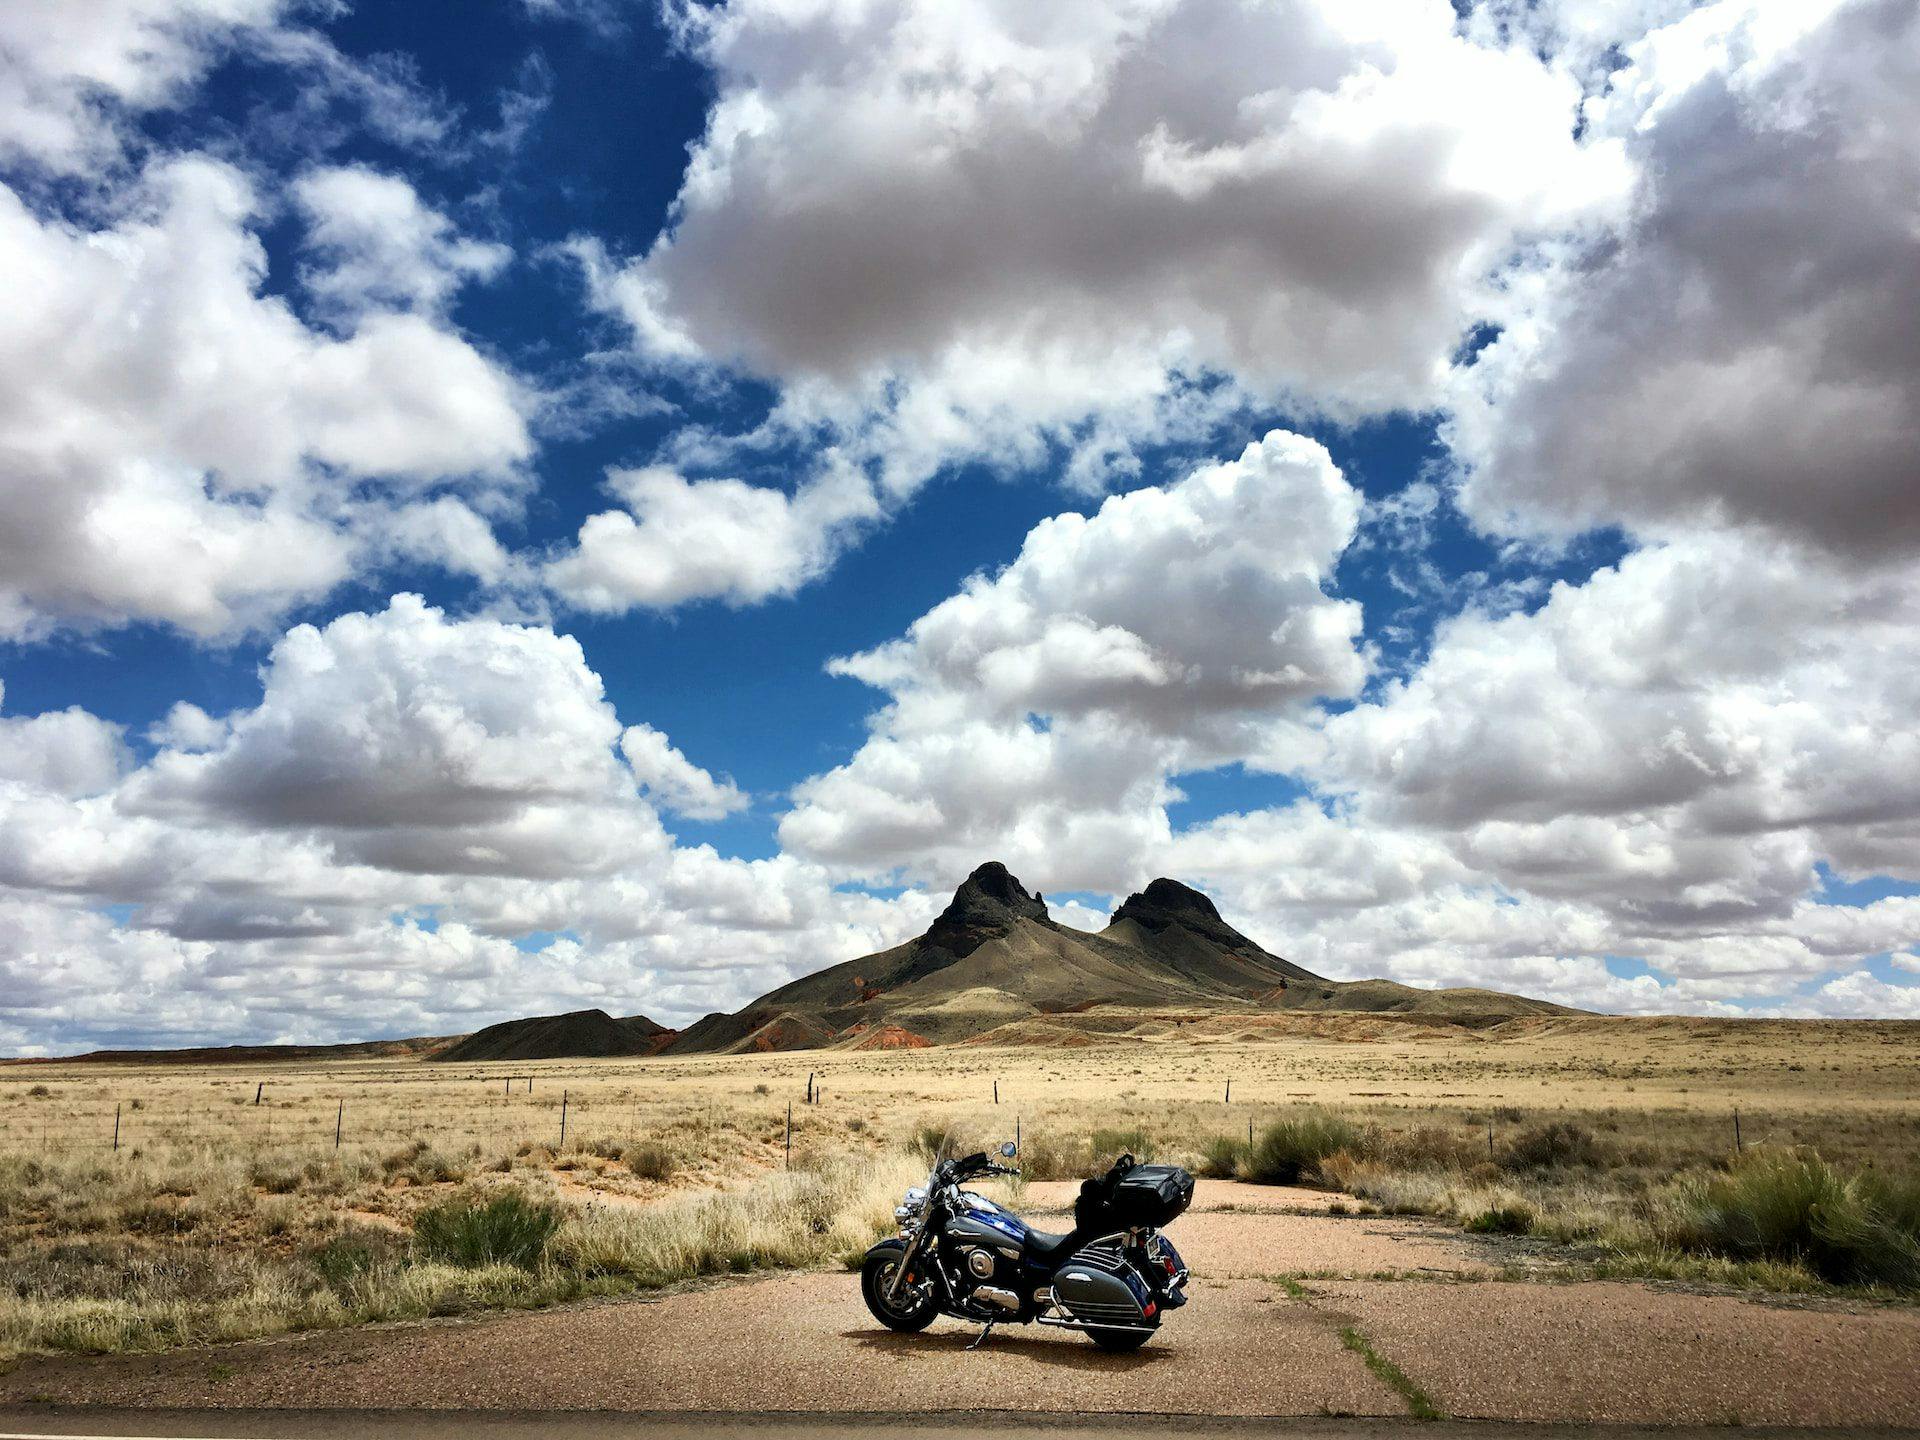 Riding in Style: Indian Motorcycle Rentals for Your Next Adventure